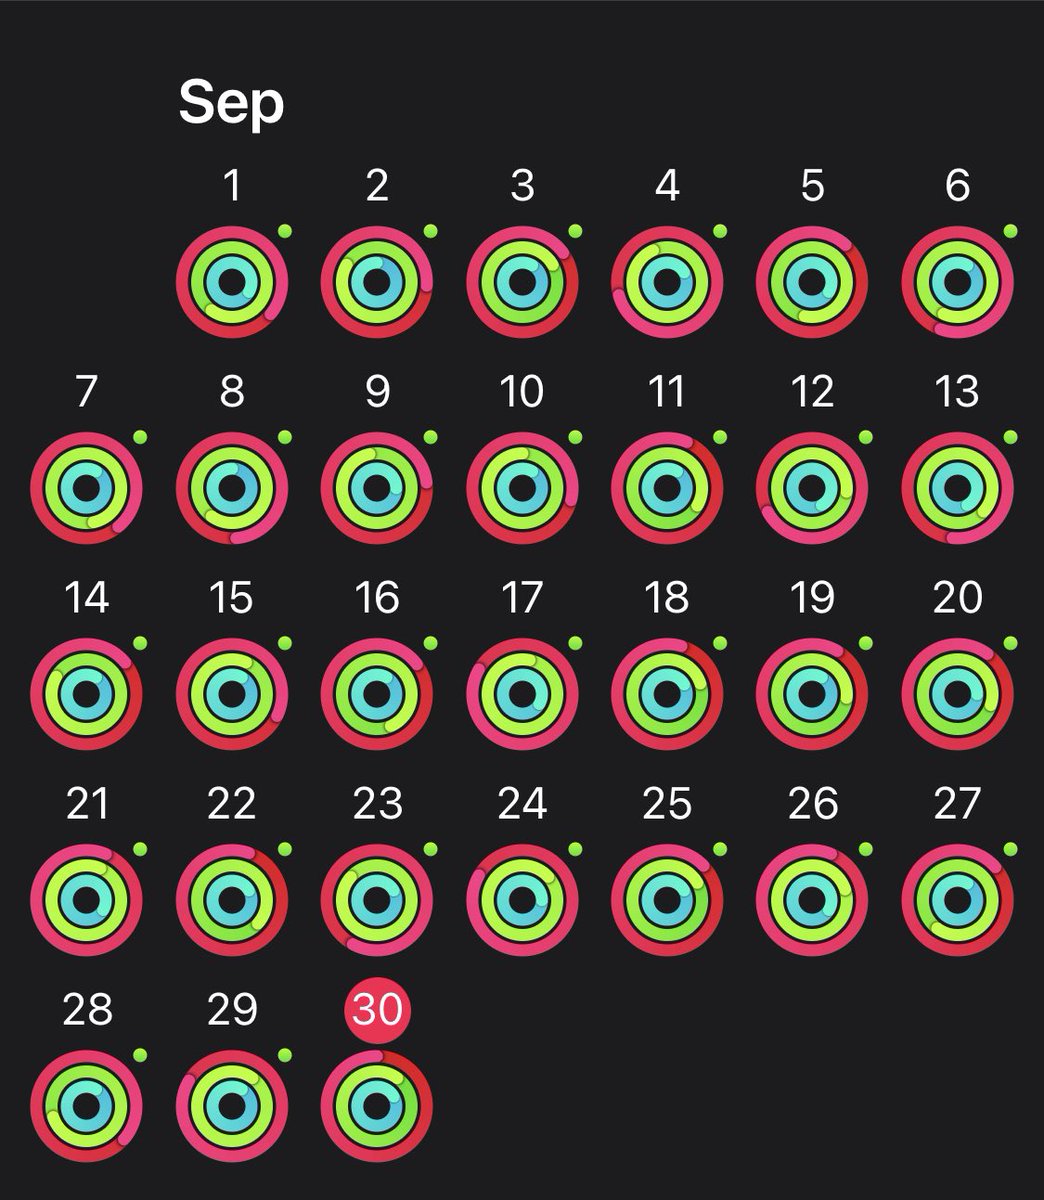 Finally something good happened in 2020. My first perfect month. #closeTheRings #AppleWatch